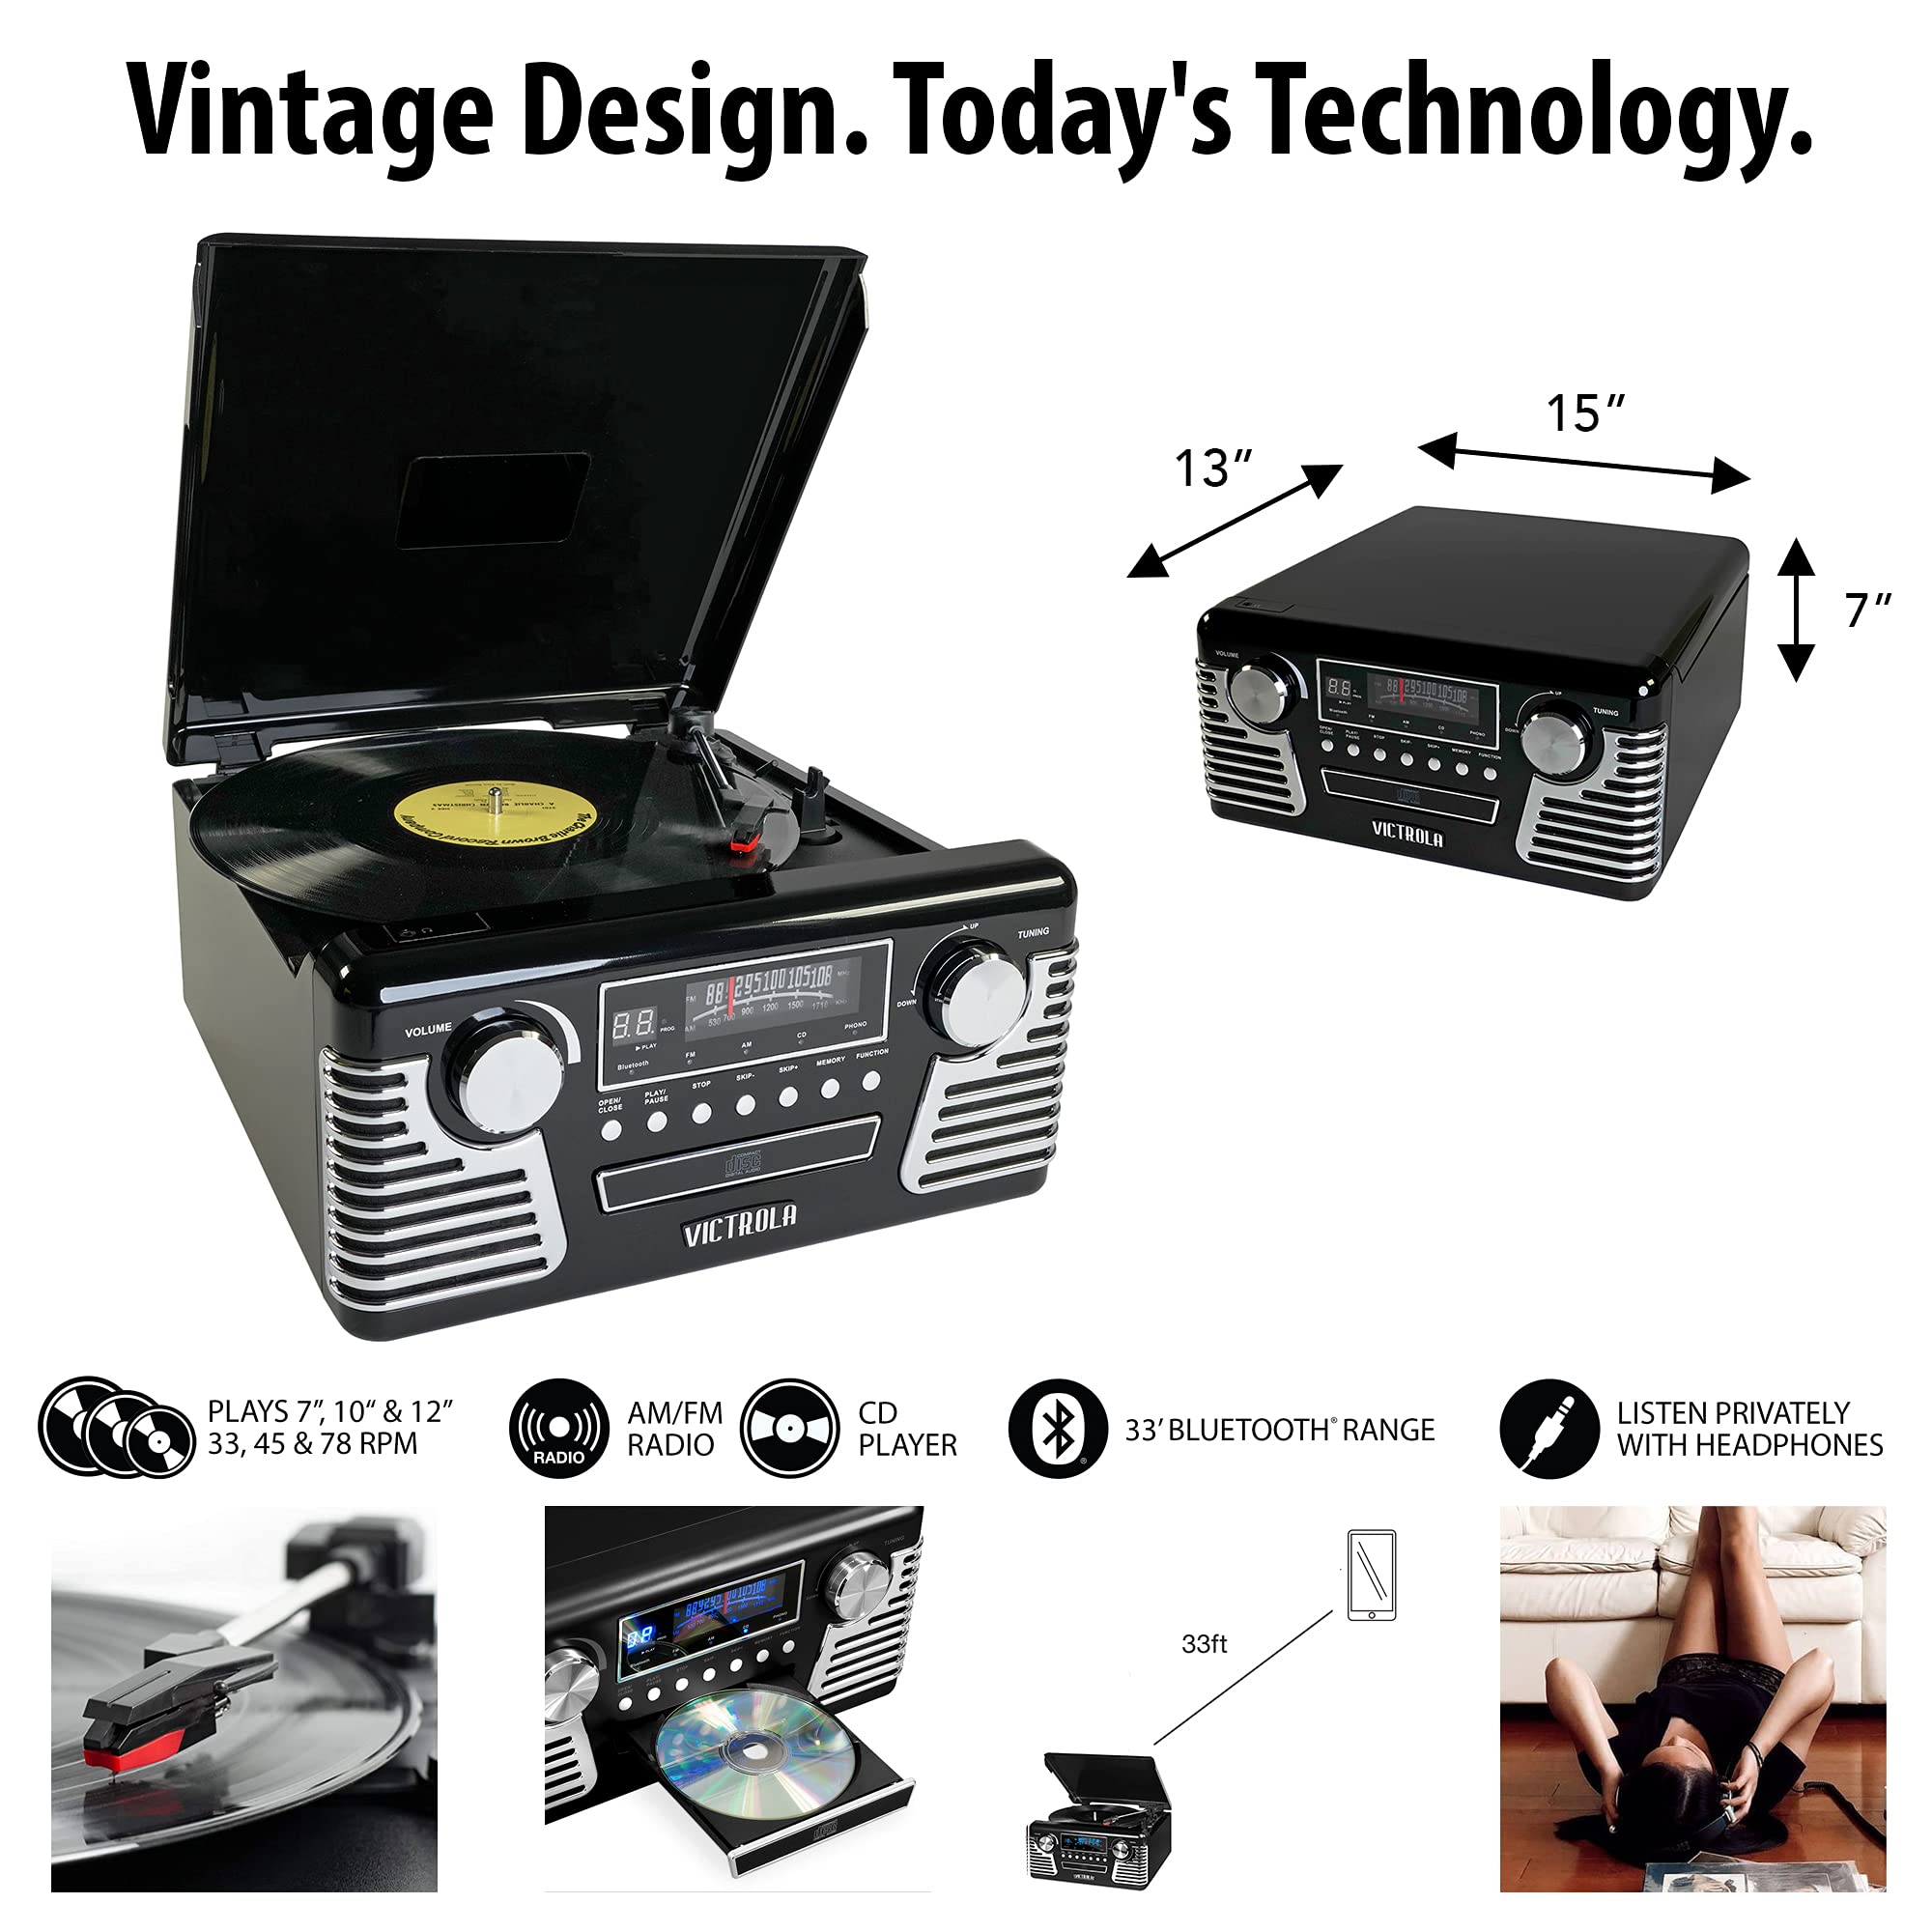 Victrola 50's Retro Bluetooth Record Player & Multimedia Center with Built-in Speakers - 3-Speed Turntable, CD Player, AM/FM Radio | Vinyl to MP3 Recording | Wireless Music Streaming | Black